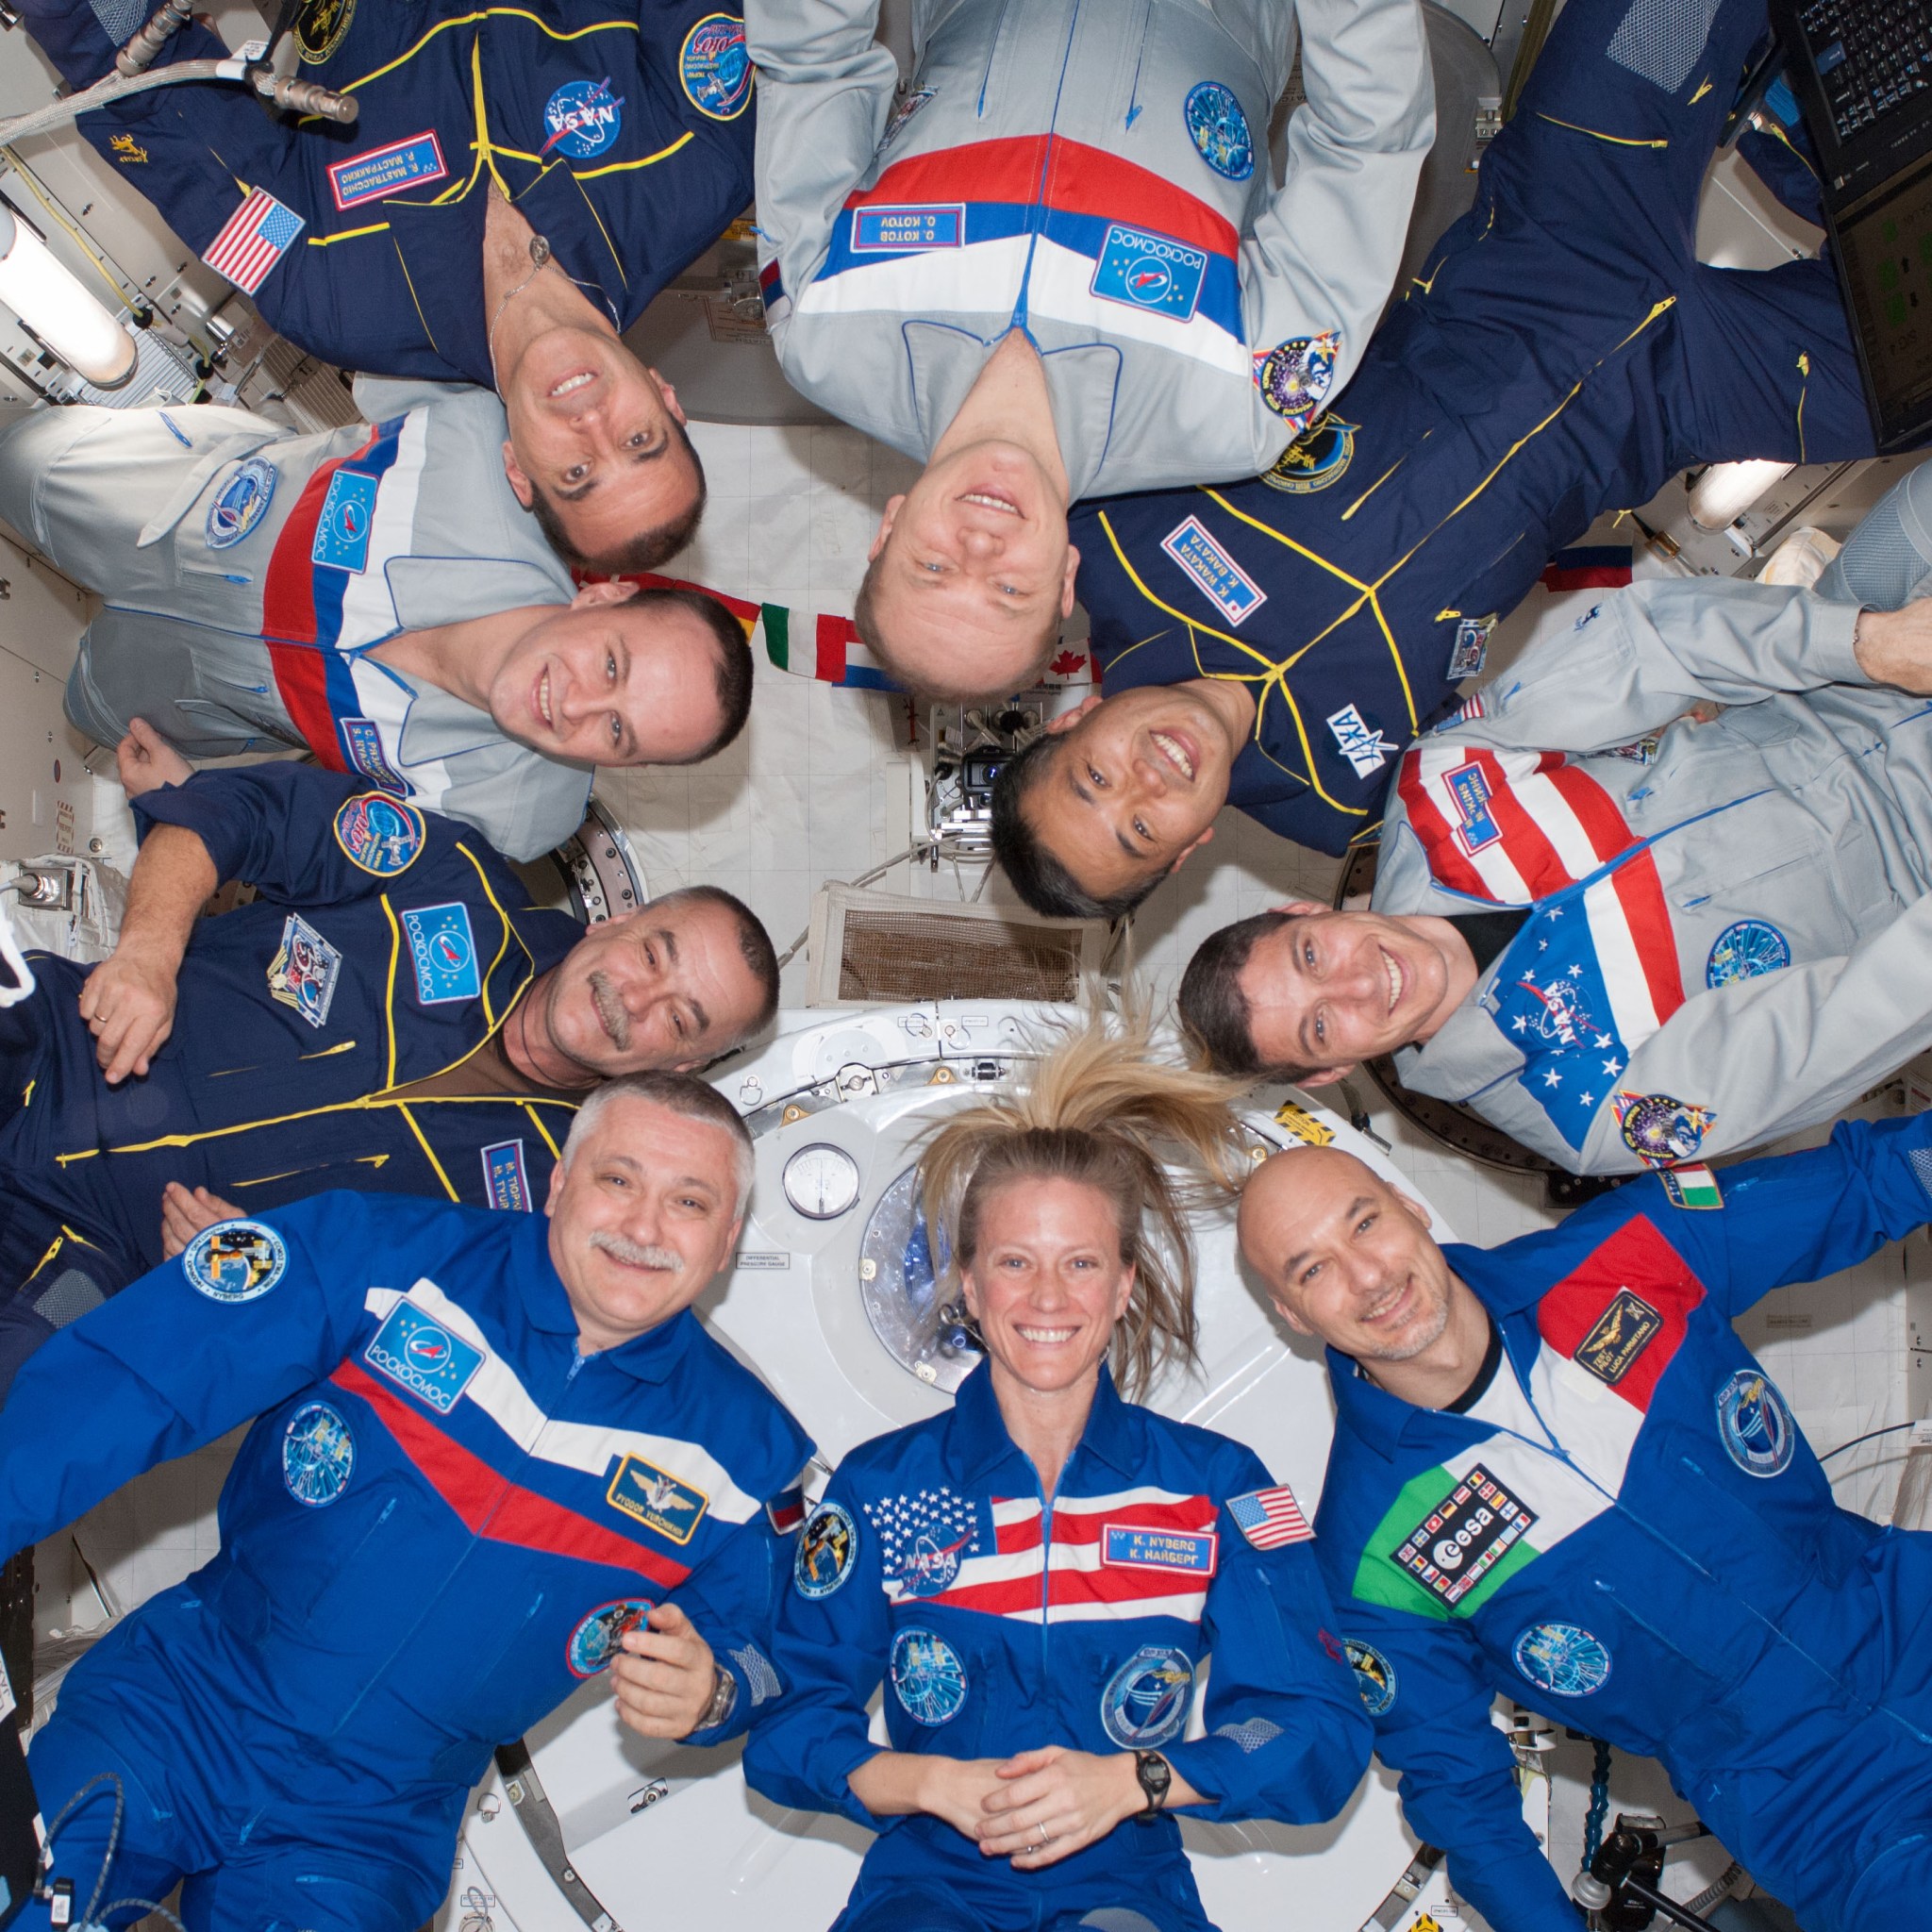 Nine crew members gather for a group portrait in the International Space Station's Kibo laboratory following a joint crew news conference. This is the first time since October 2009 that nine people have resided on the station without the presence of a space shuttle.